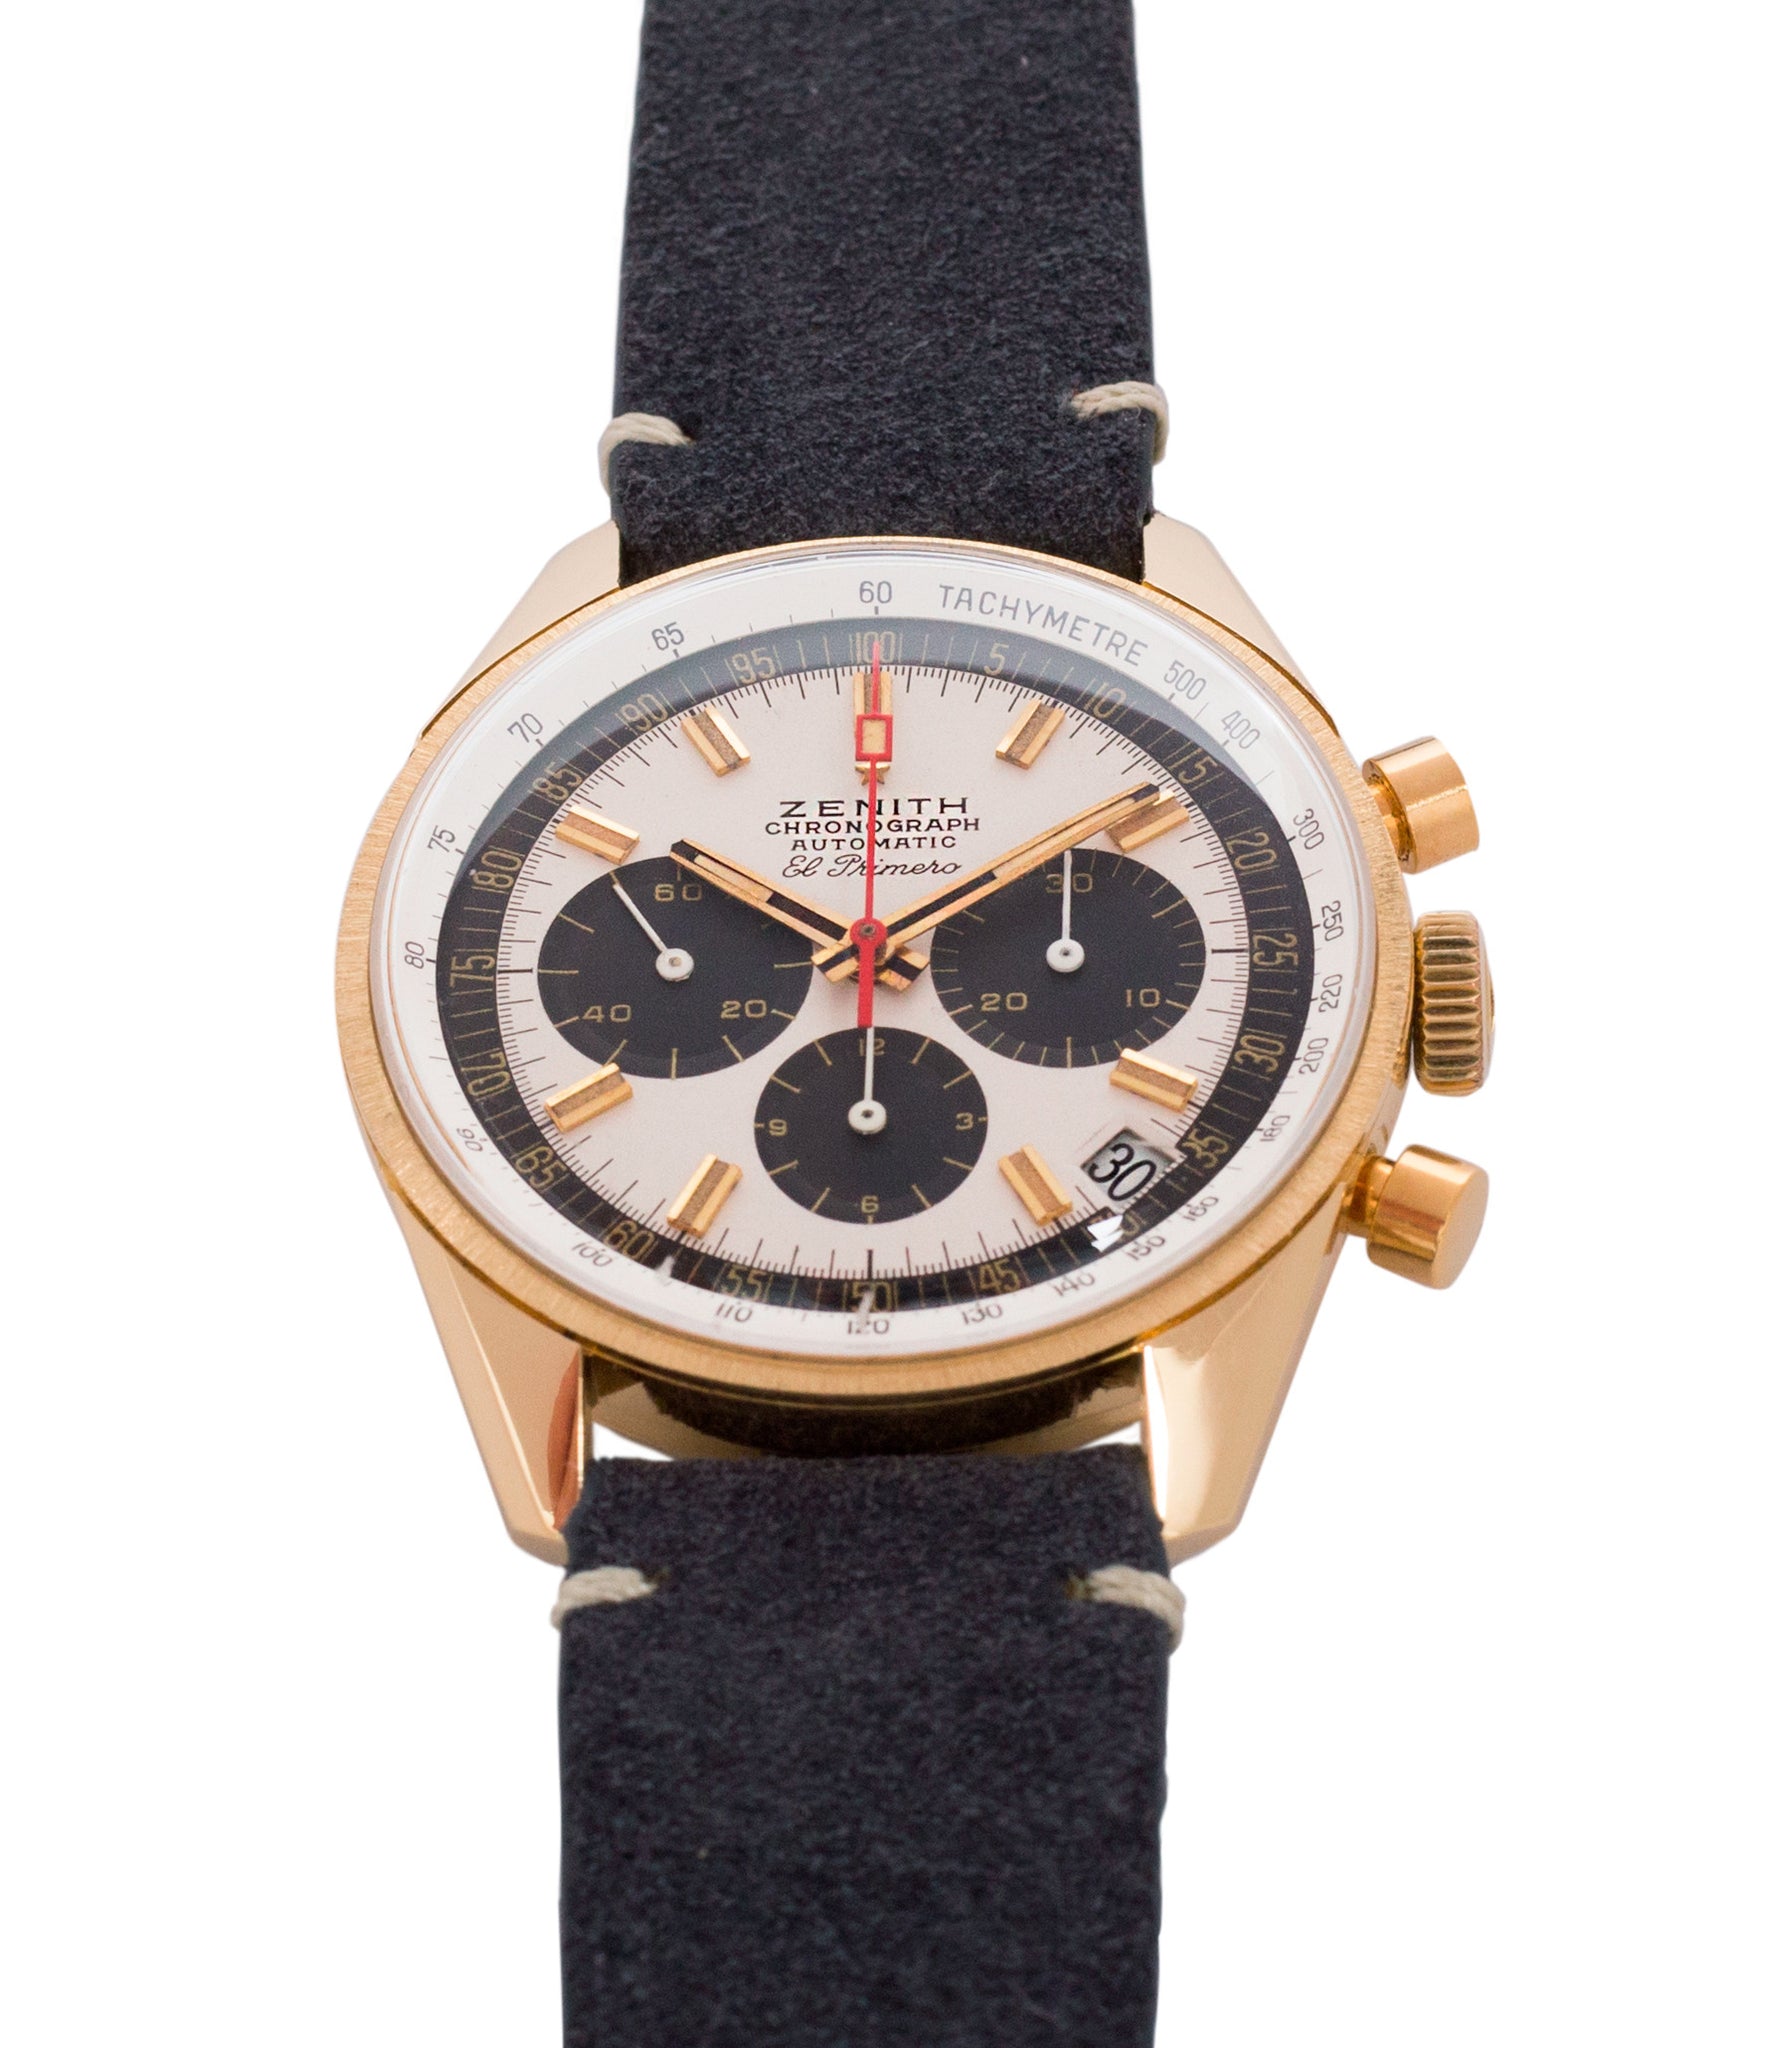 silver dial black subs Zenith El Primero G381 rare yellow gold vintage chronograph date watch for sale online at A Collected Man London vintage watch specialist